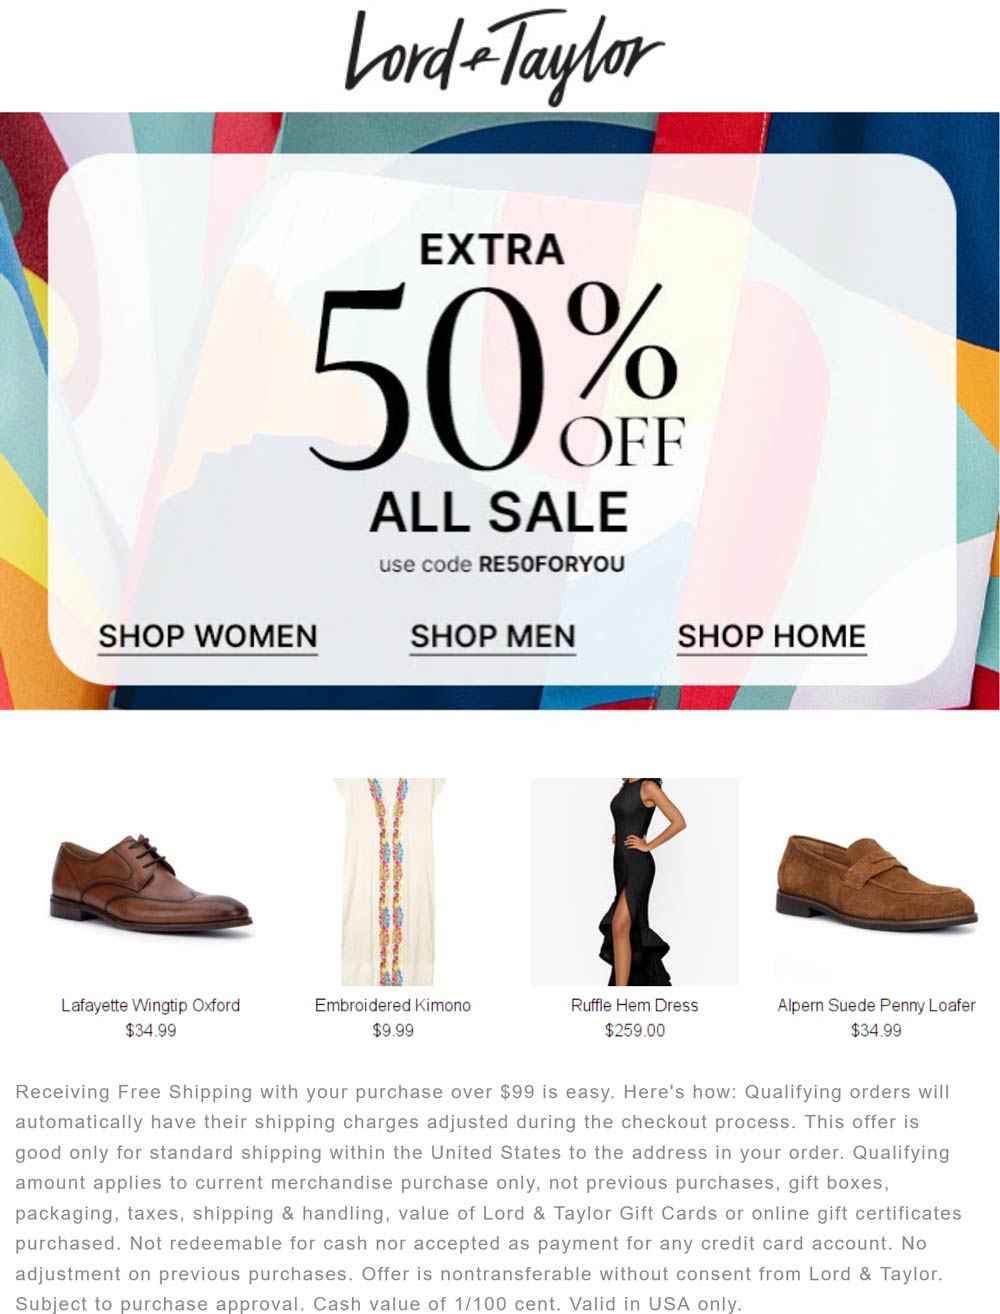 Lord & Taylor stores Coupon  Extra 50% off all sale at Lord & Taylor via promo code RE50FORYOU #lordtaylor 